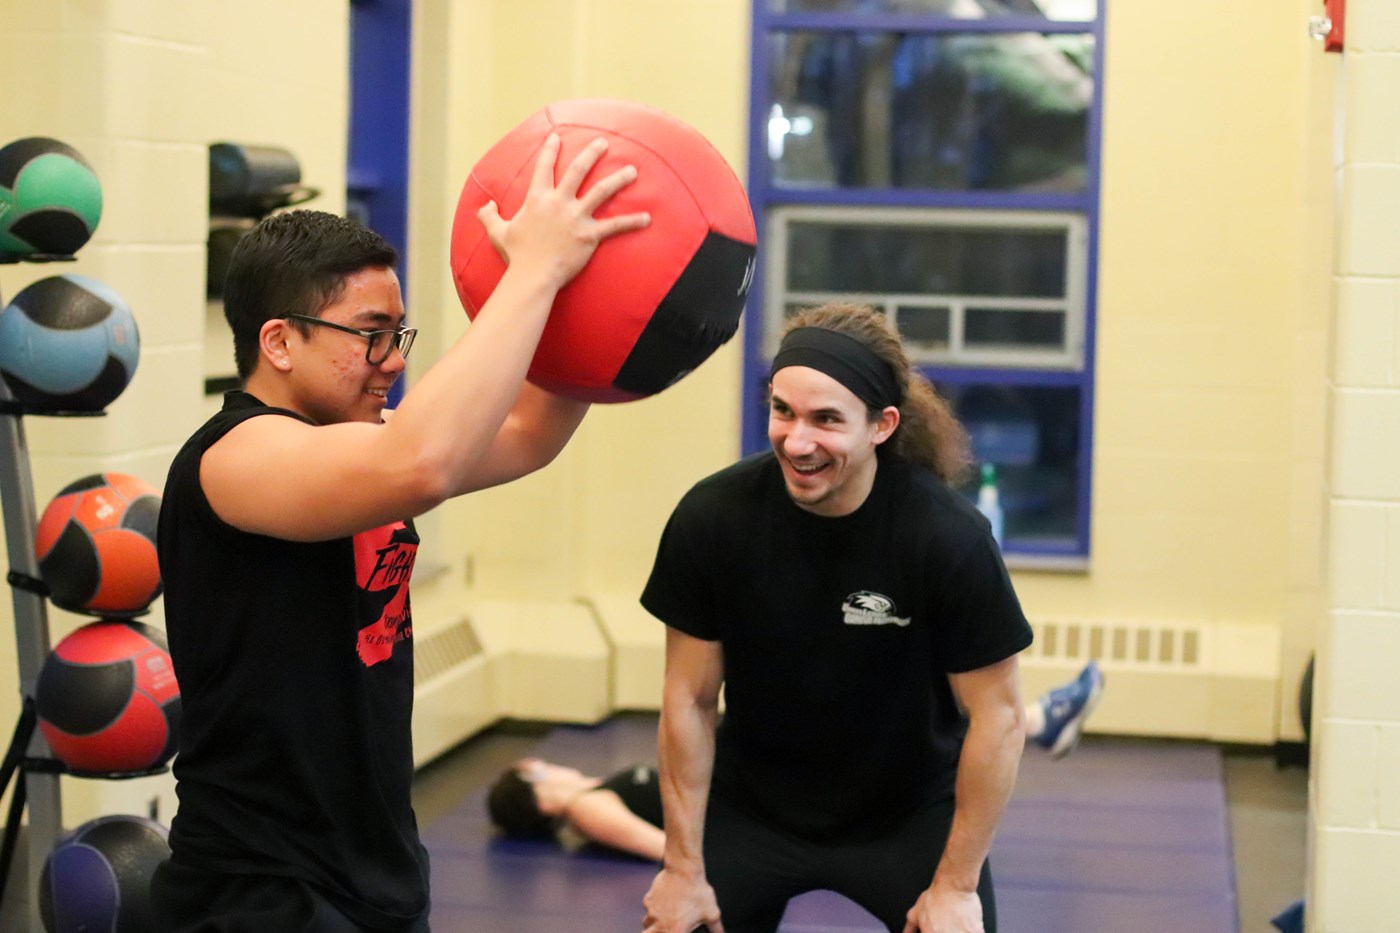 Personal Trainer cheering on student client doing a medicine ball slam